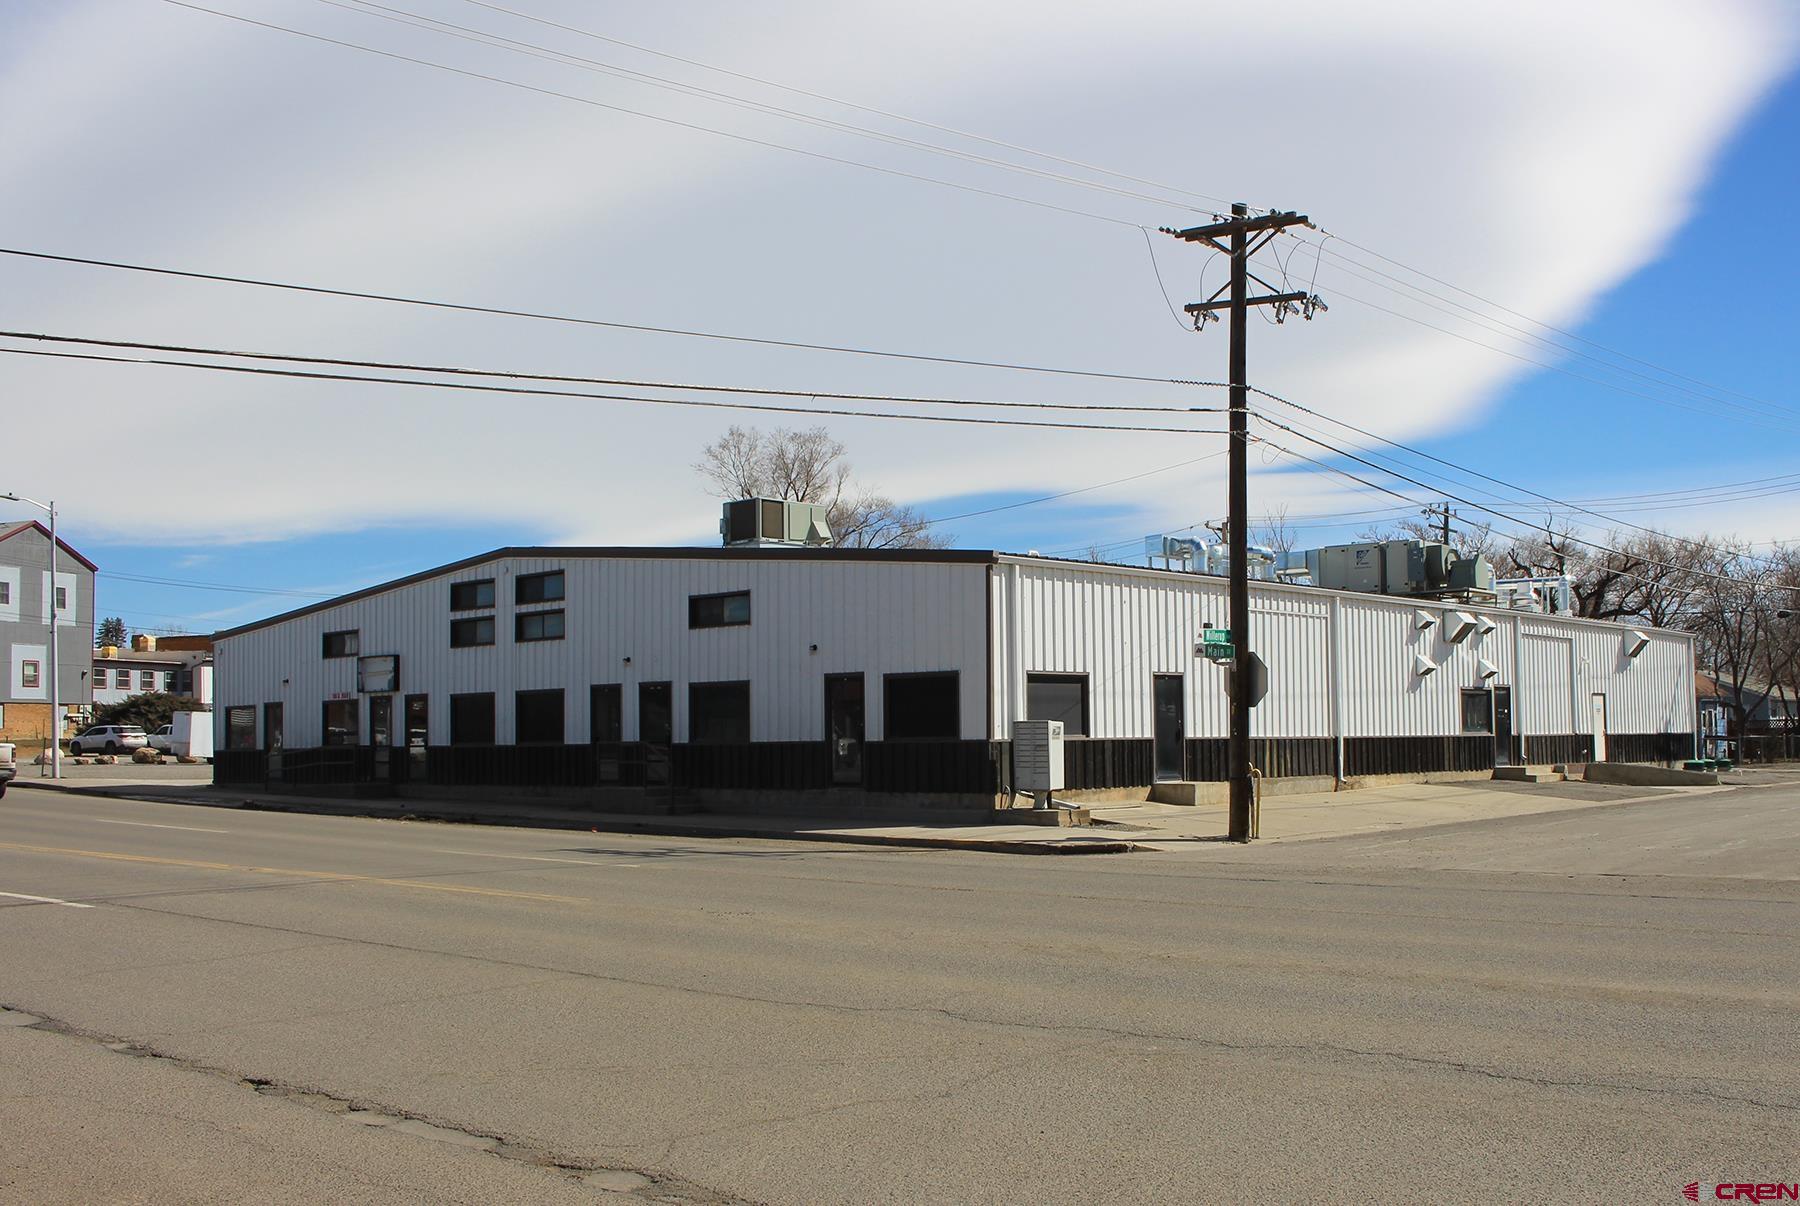 Large 14,699 SF MOL Commercial/Industrial building.  Most recently has been used as a pet treat production facility.  Favorable B-2A zoning allows for many different business types making this an incredible opportunity with both ample square footage and vacant land.  Amazing location for both Sales/Service type business (Central in town) or Warehousing/Distribution (Direct access to the main thoroughfares).  Serviced by 2" gas line, and 800 Amp electrical, energy infrastructure is already in place for almost any use.  Suitable for a single tenant or multiple.  The building could easily be split up and rented out to multiple tenants as it has been in the past.  Existing walls could be used to create various sized units.    Huge 17' ceilings inside.  3 existing overhead doors, of 7', 10' and 12' on the Parking Lot side.  There were also previously two 12' overhead doors on the Willerup Ave side that have been filled in, but could be re-converted by a new owner.  One is set up for a 26" loading dock.  All cold storage room walls and ceilings could be removed to create more area with full floor to ceiling height.